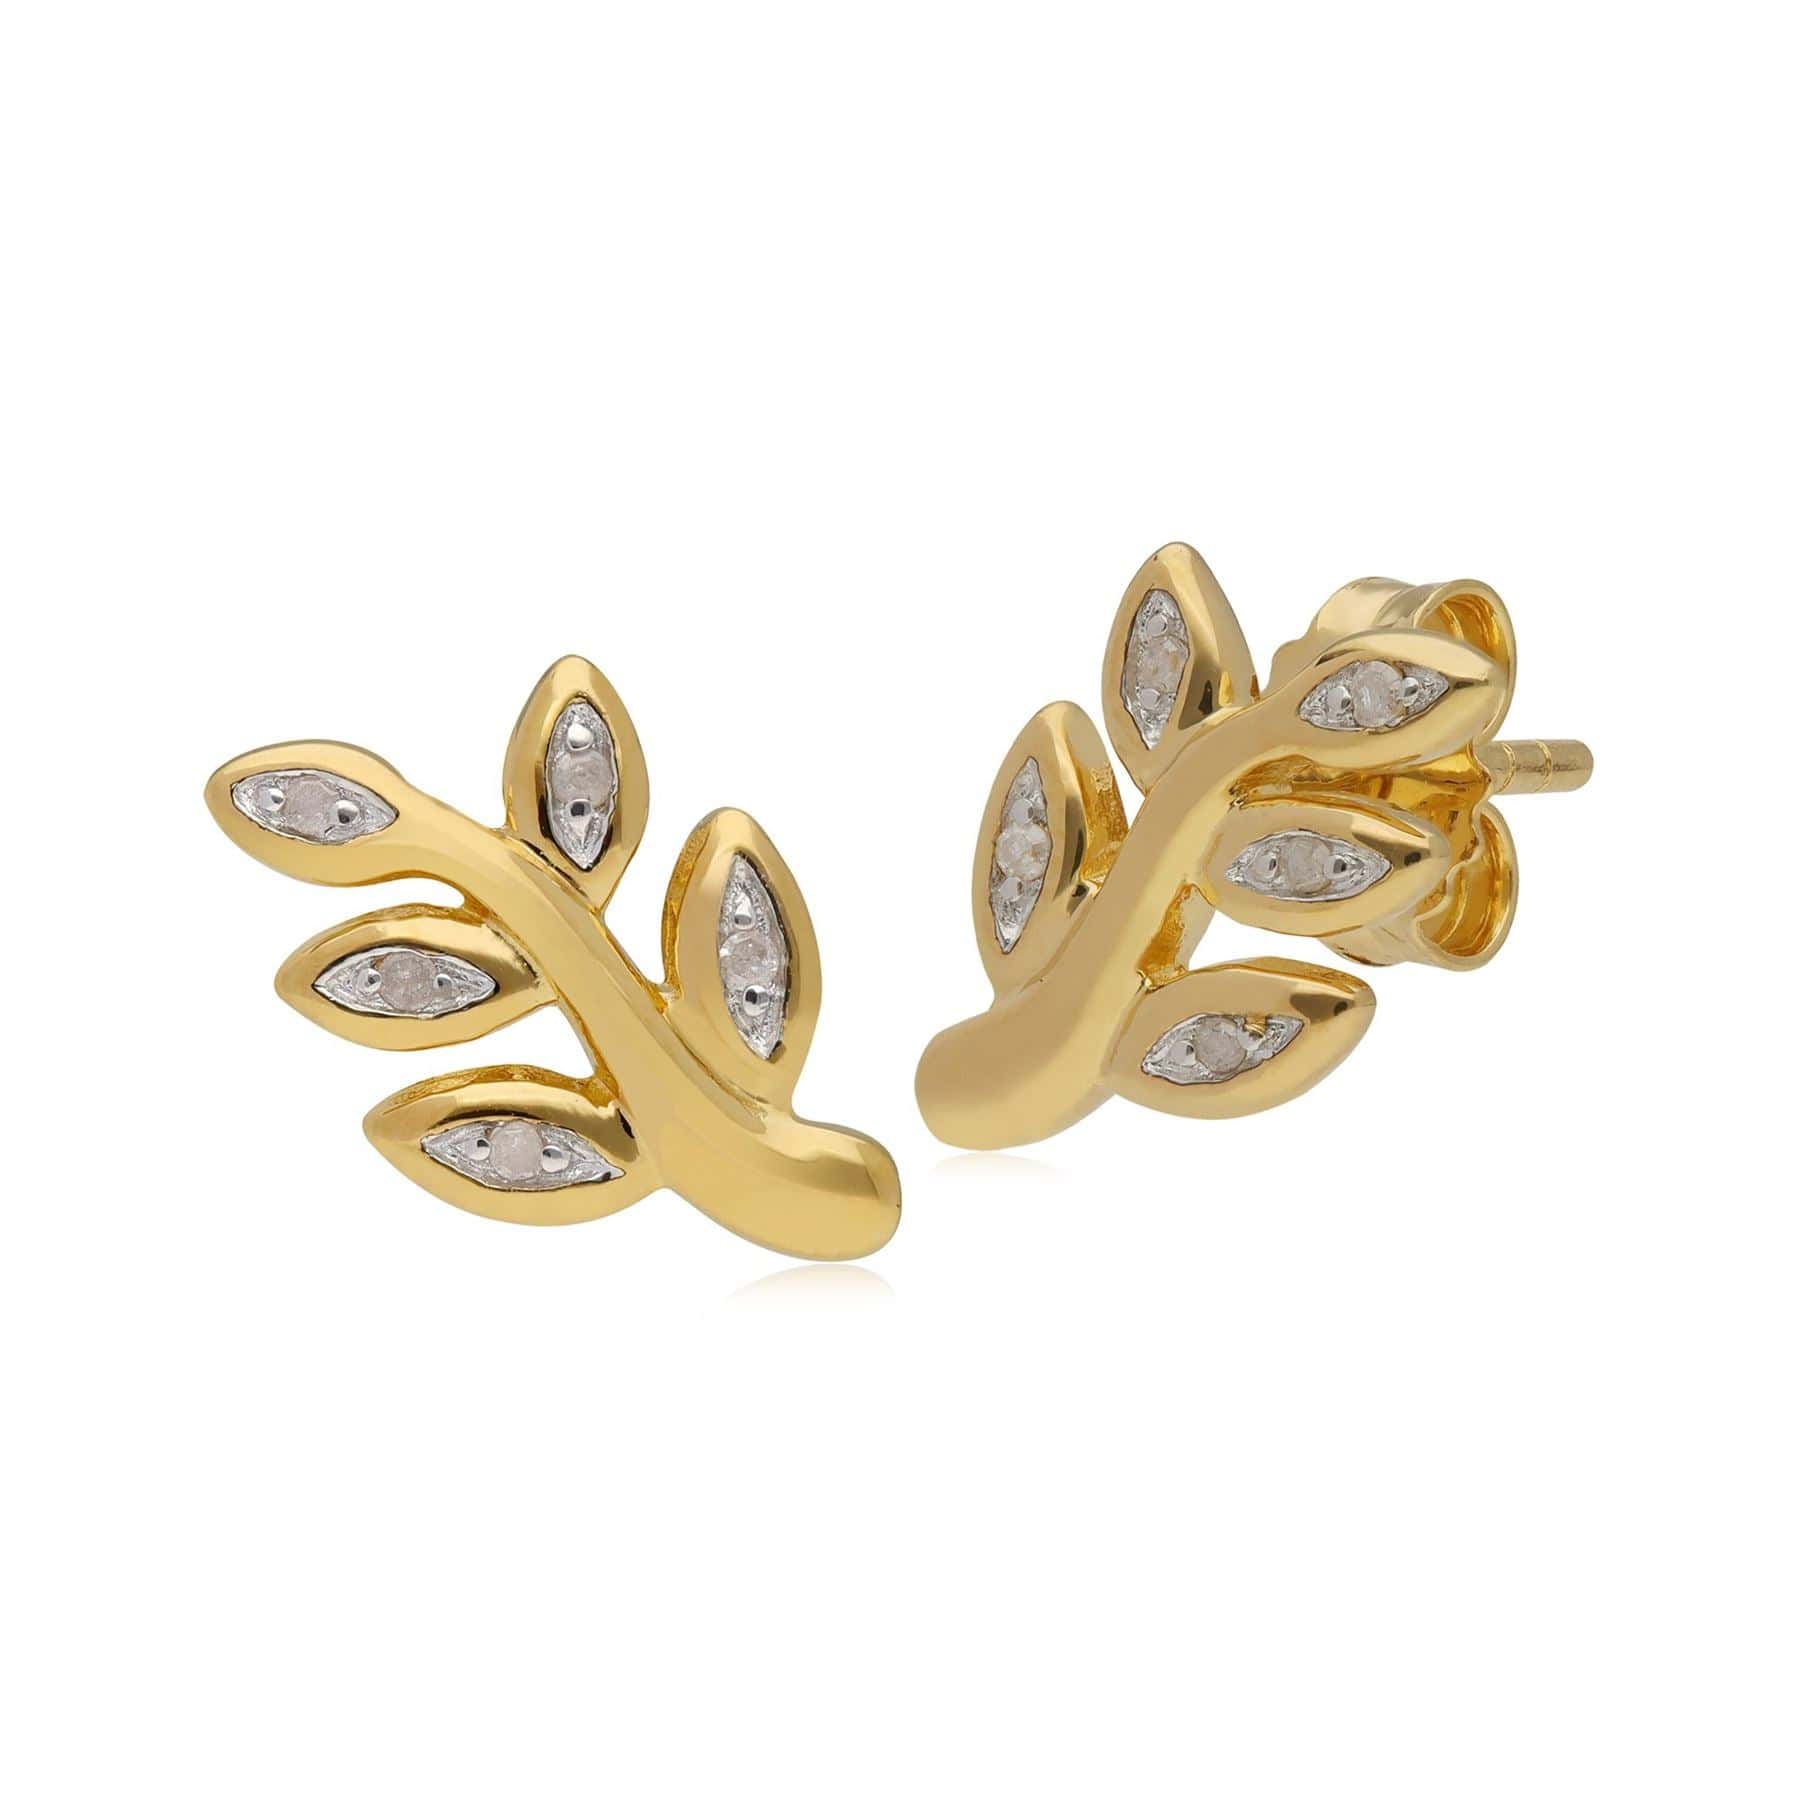 Kosmos Diamond Leaf Shaped Stud Earrings in Yellow Gold Plated Sterling Silver - Gemondo